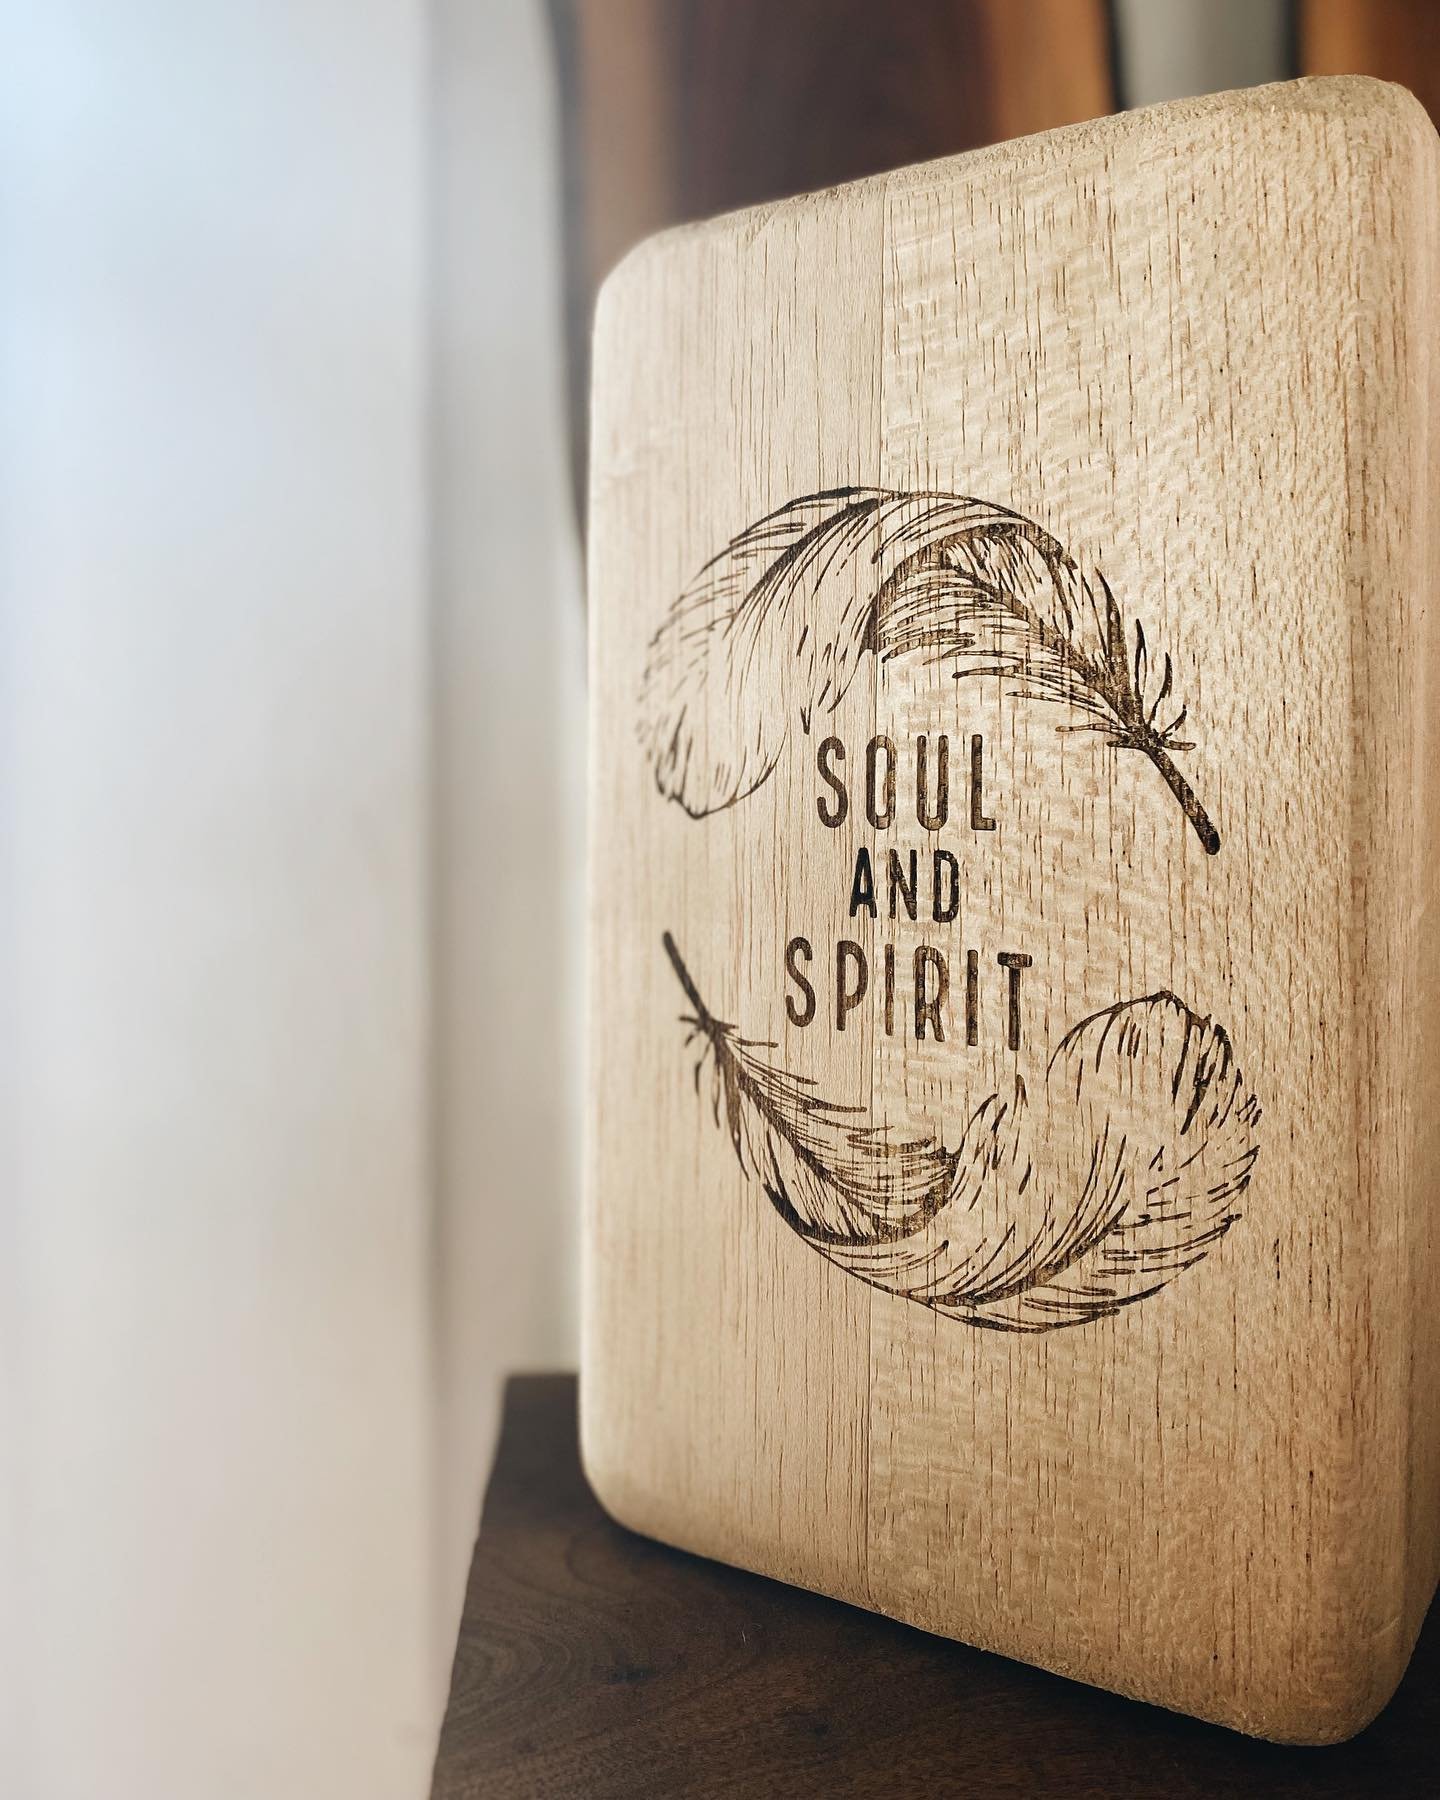 When you do things from your soul, you feel a river moving in you, a joy.

-Rumi
&bull;
&bull;
&bull;
&bull;
Locally engraved @imjusaying
#rumi #rumiquotes #soulwork #inharmonyoga #engravedyogablock #yogaprops #yoga #soulandspirit #inharmonyogastudio